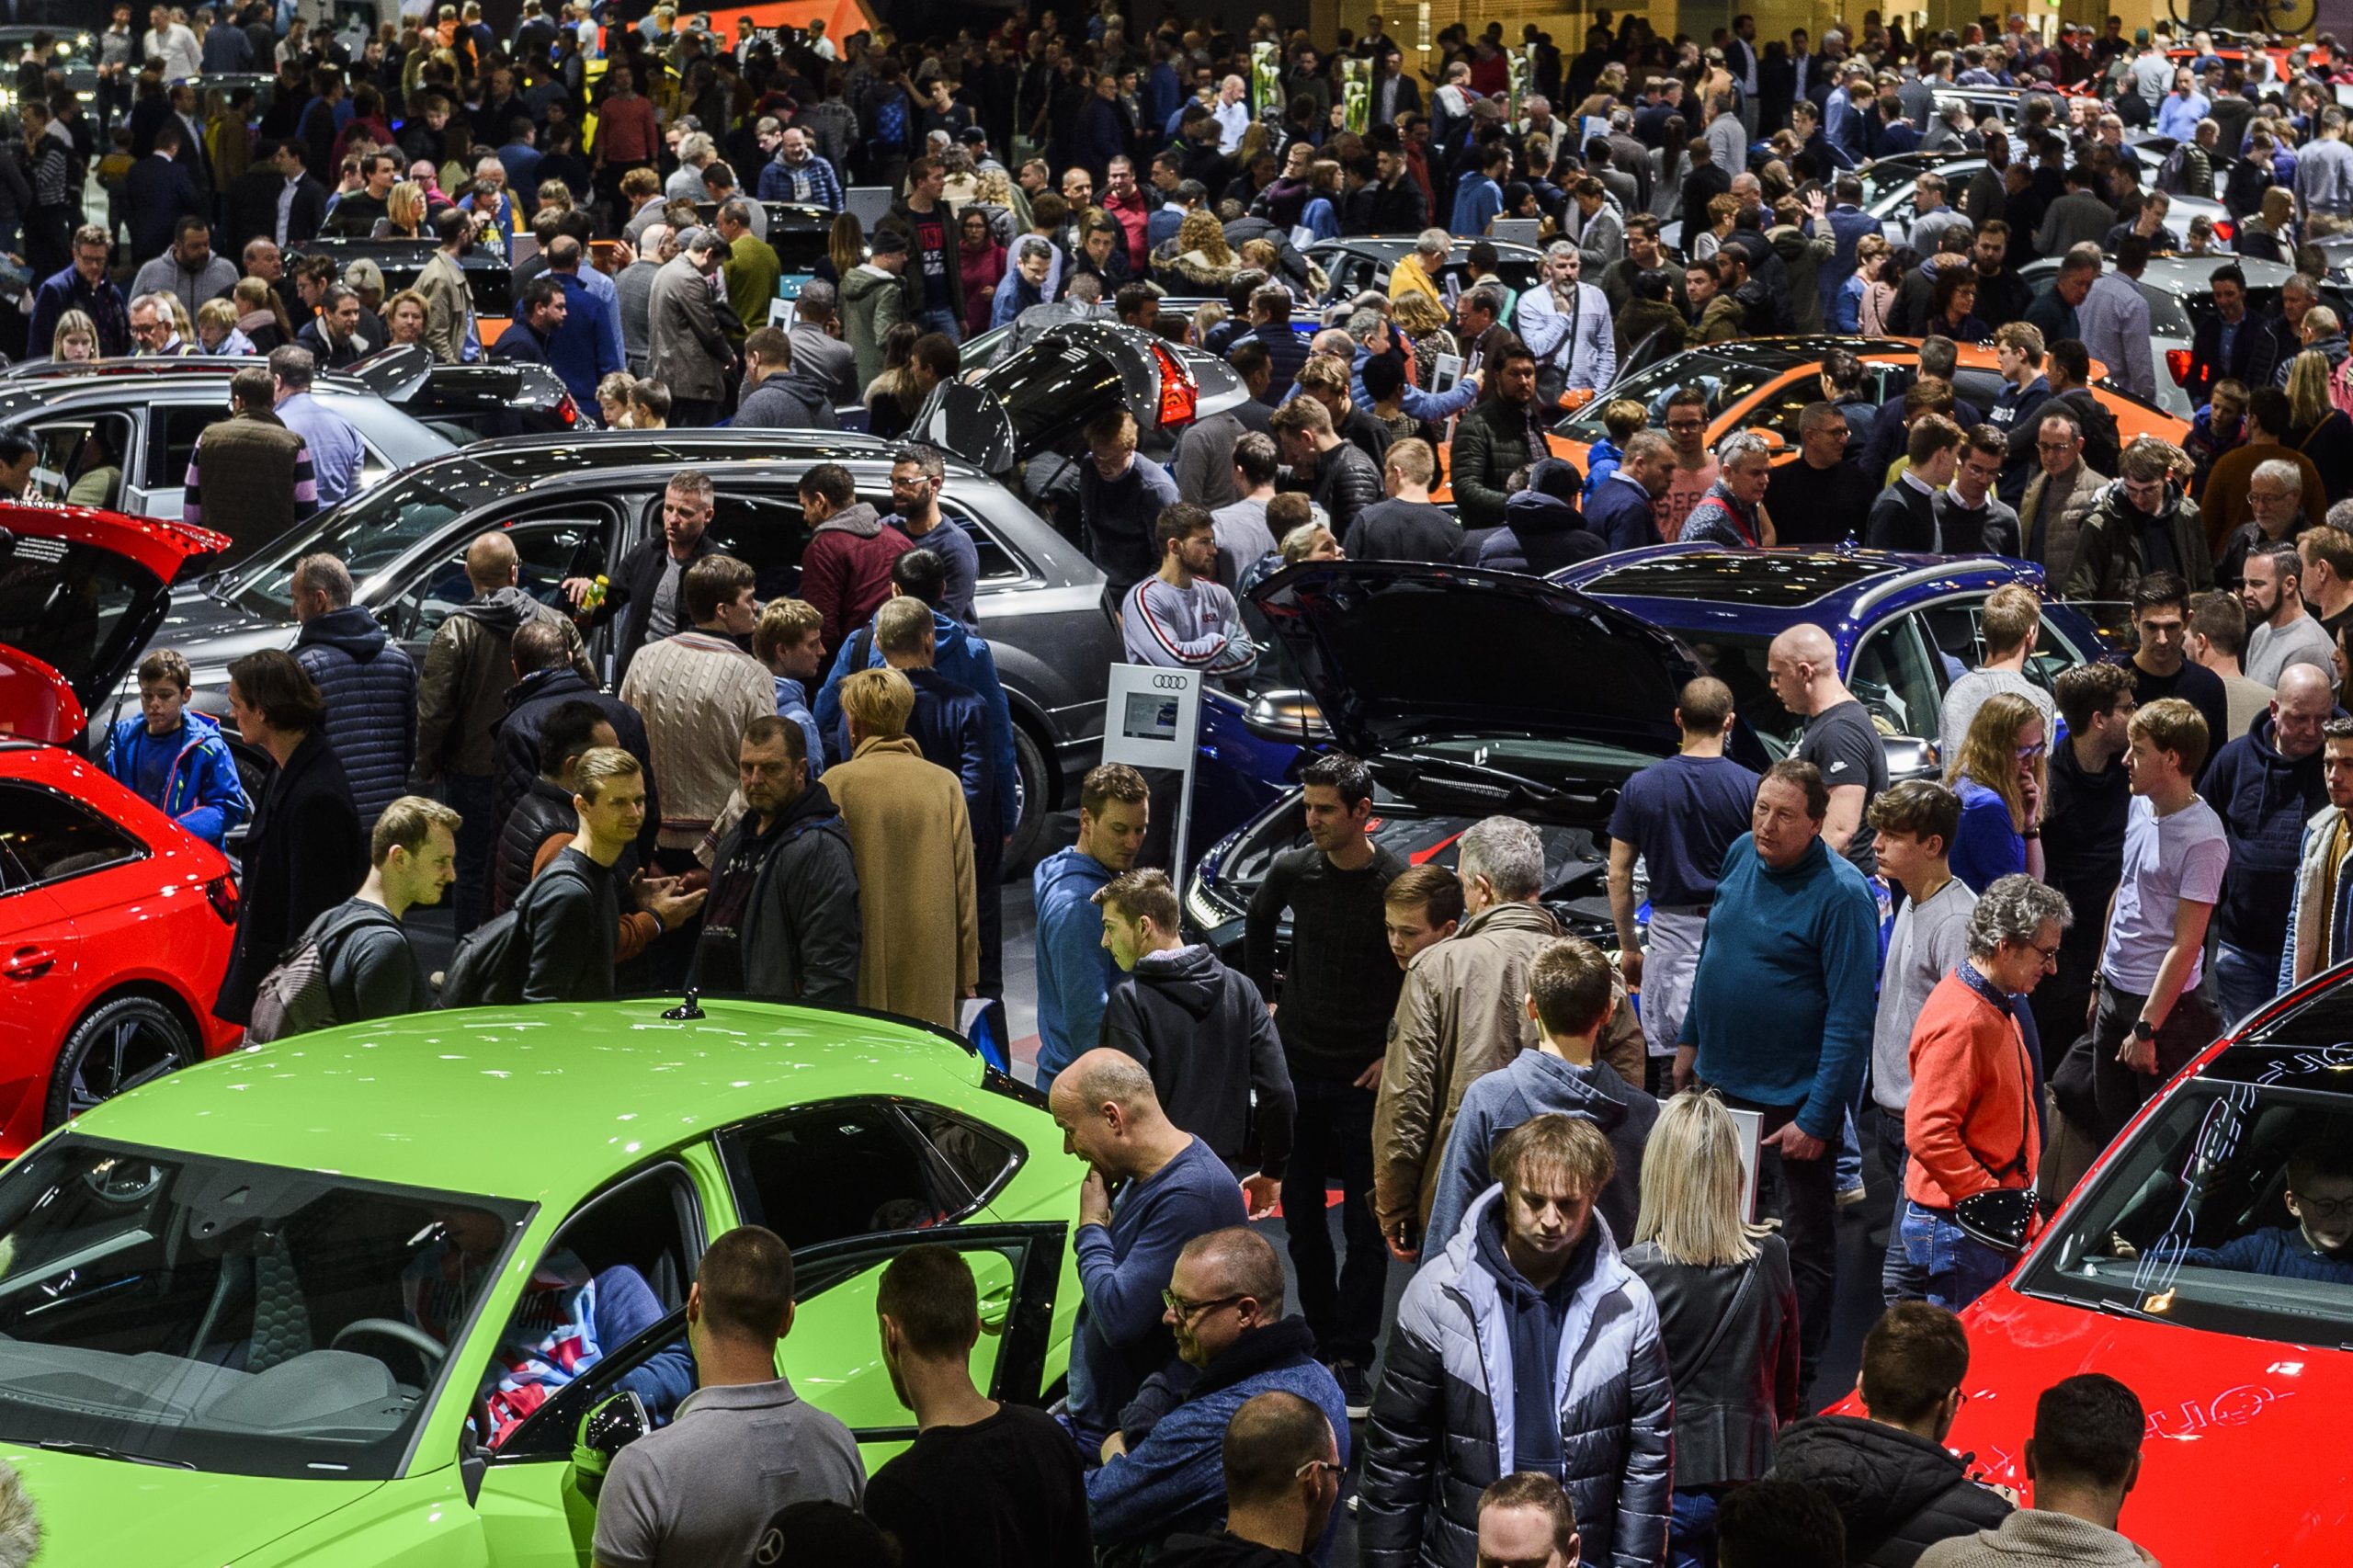 Uncertainty leeds to hesitation for Brussels Motor Show